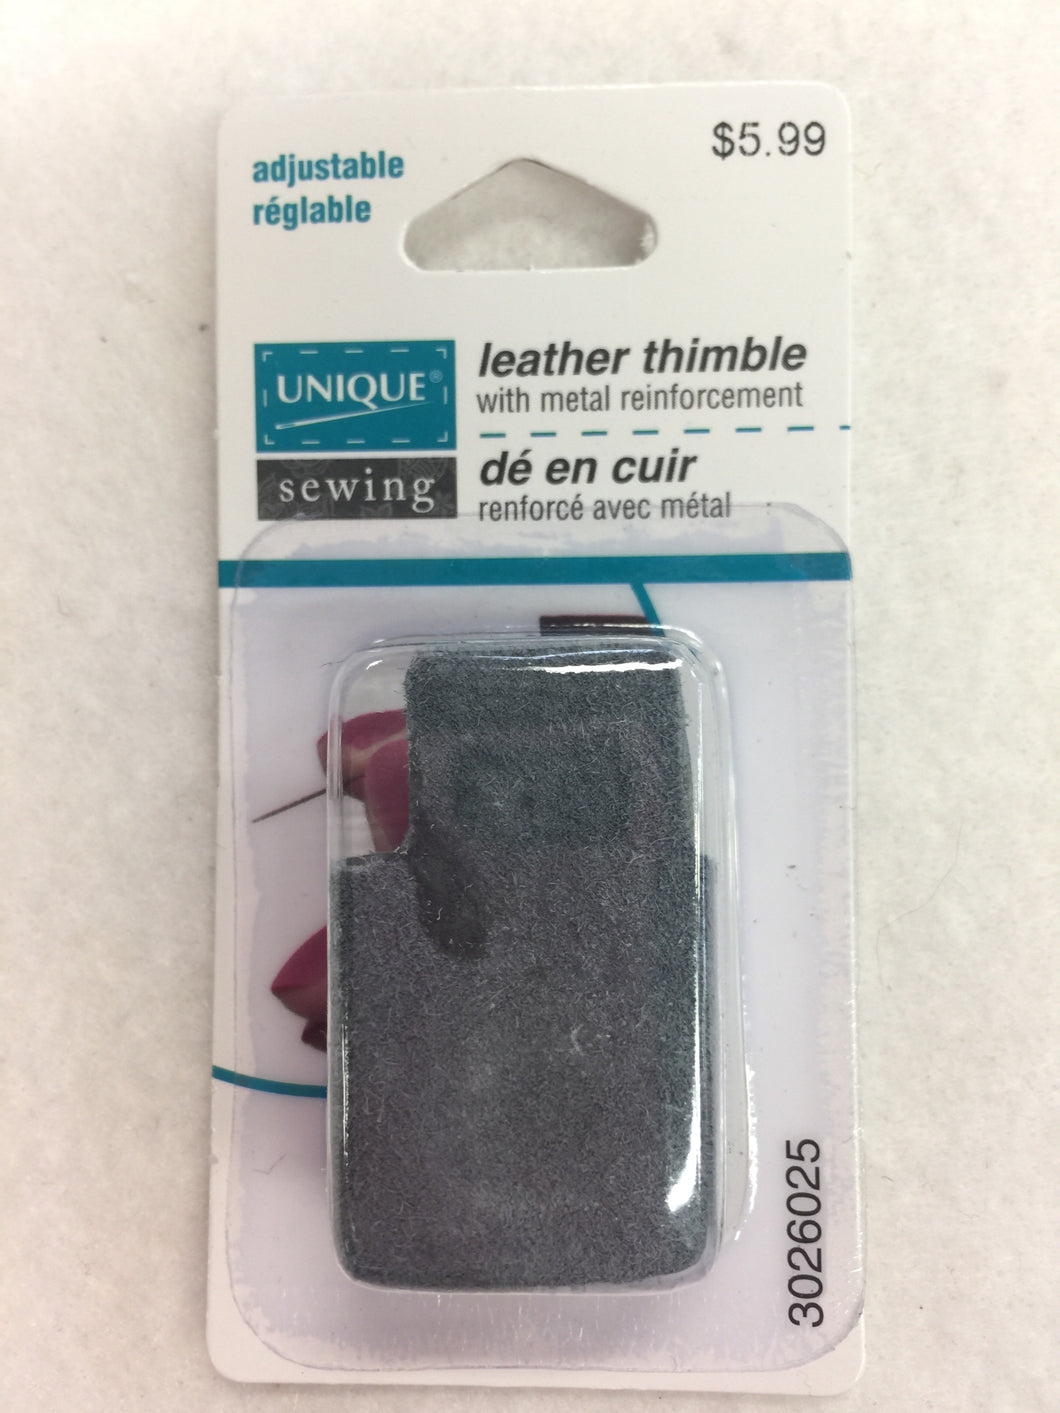 Leather Thimble with metal reinforcement